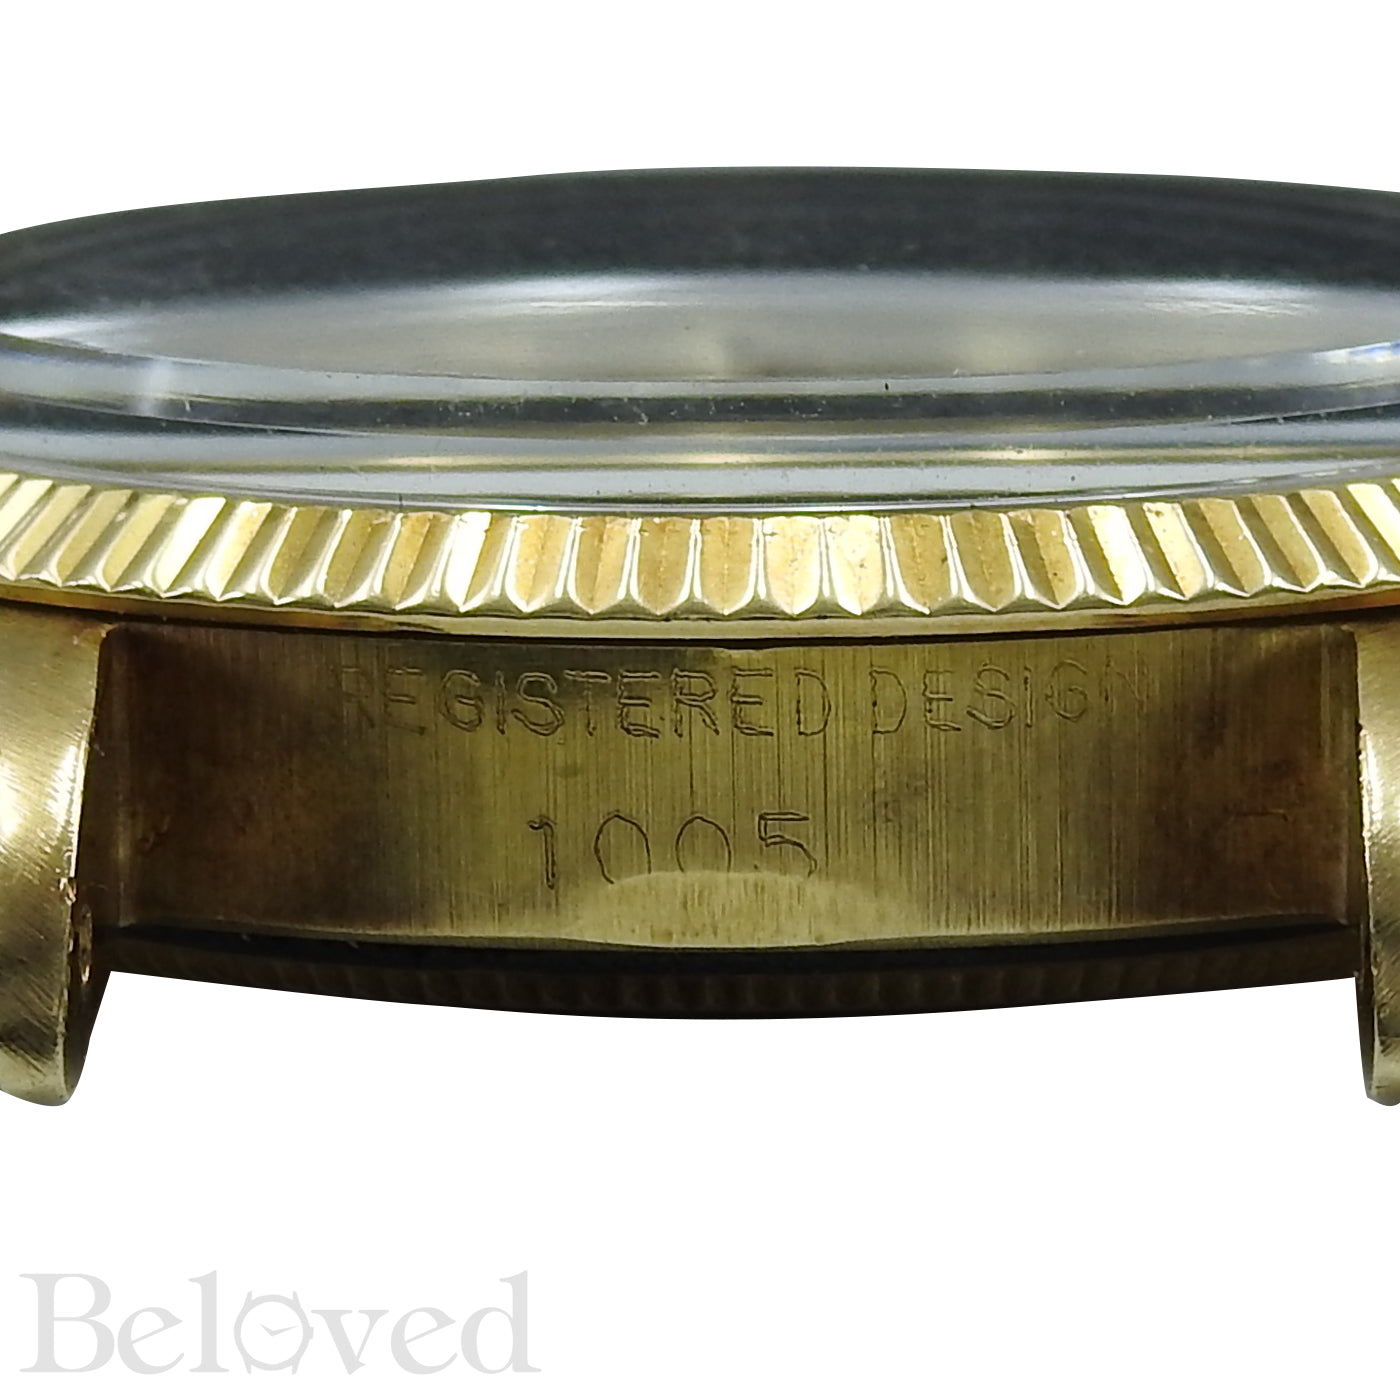 Rolex Oyster Perpetual "Underline" 1005 Image 10